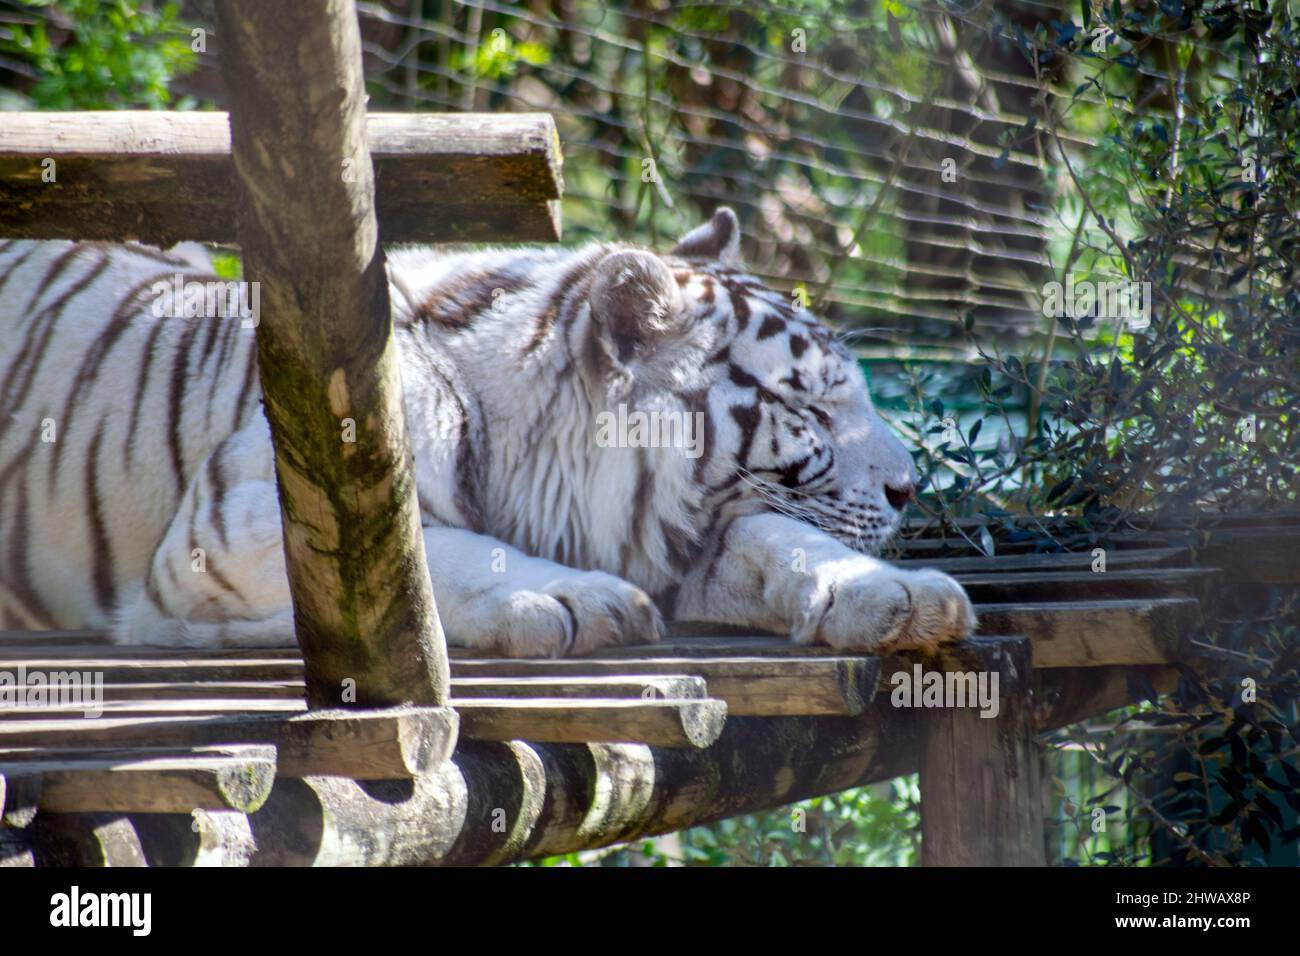 The white tiger or bleached tiger is a leucistic pigmentation variant of the Bengal tiger, Siberian tiger and hybrids between the two. Lisbon zoo. Stock Photo